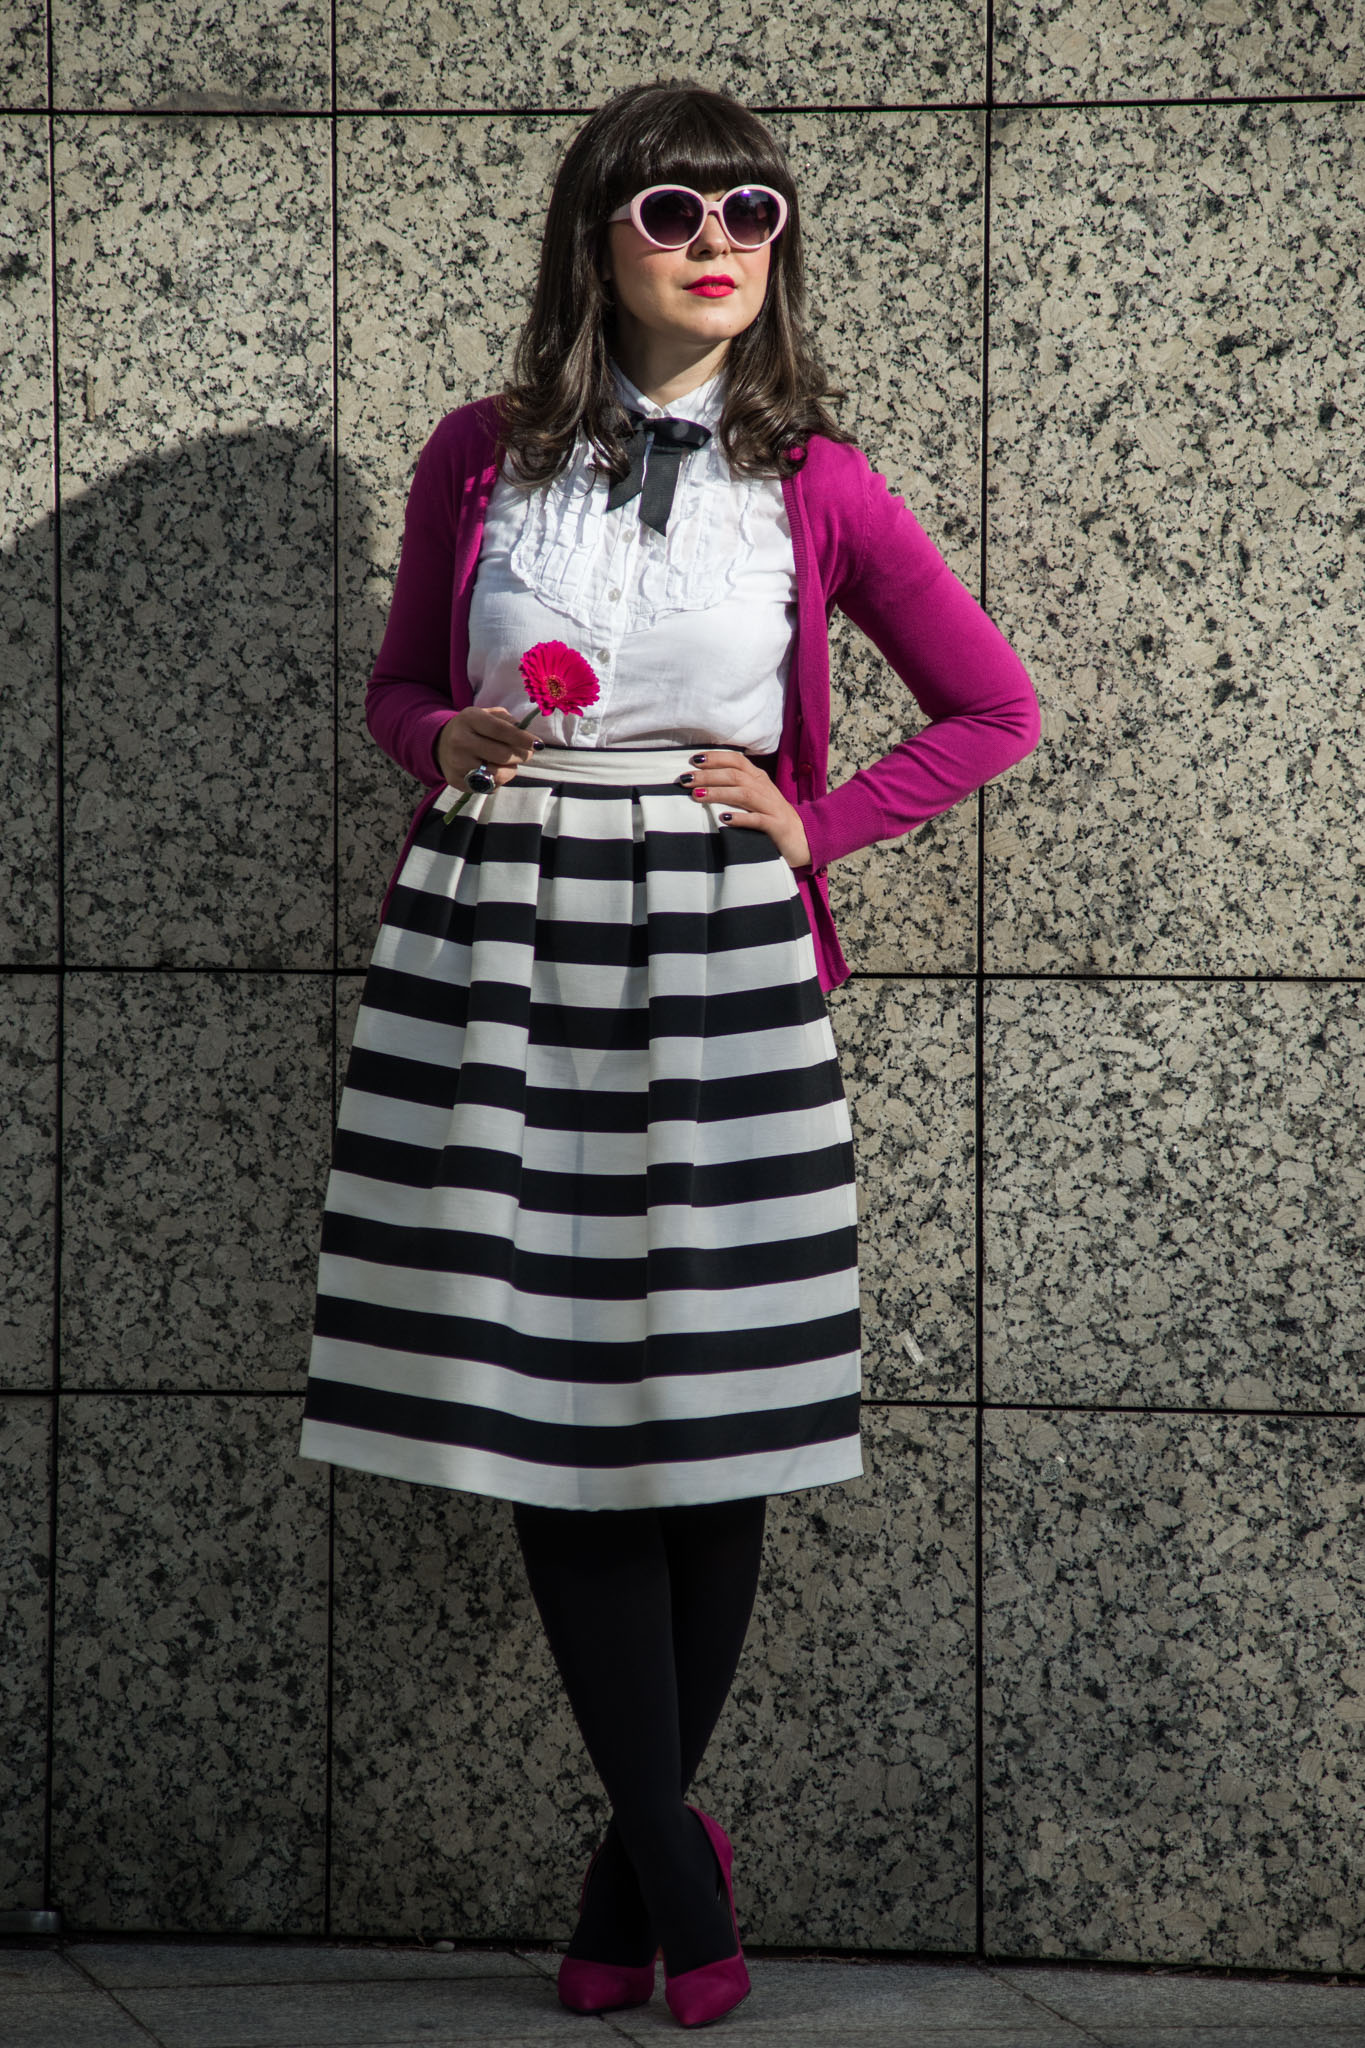 black & white outfit with stripes and pops of pink and fuchsia white shirt black bow tie fuchsia shoes heels sweater C&A striped midi skirt stripes pink thrifted trench black clutch pink cat eye glasses